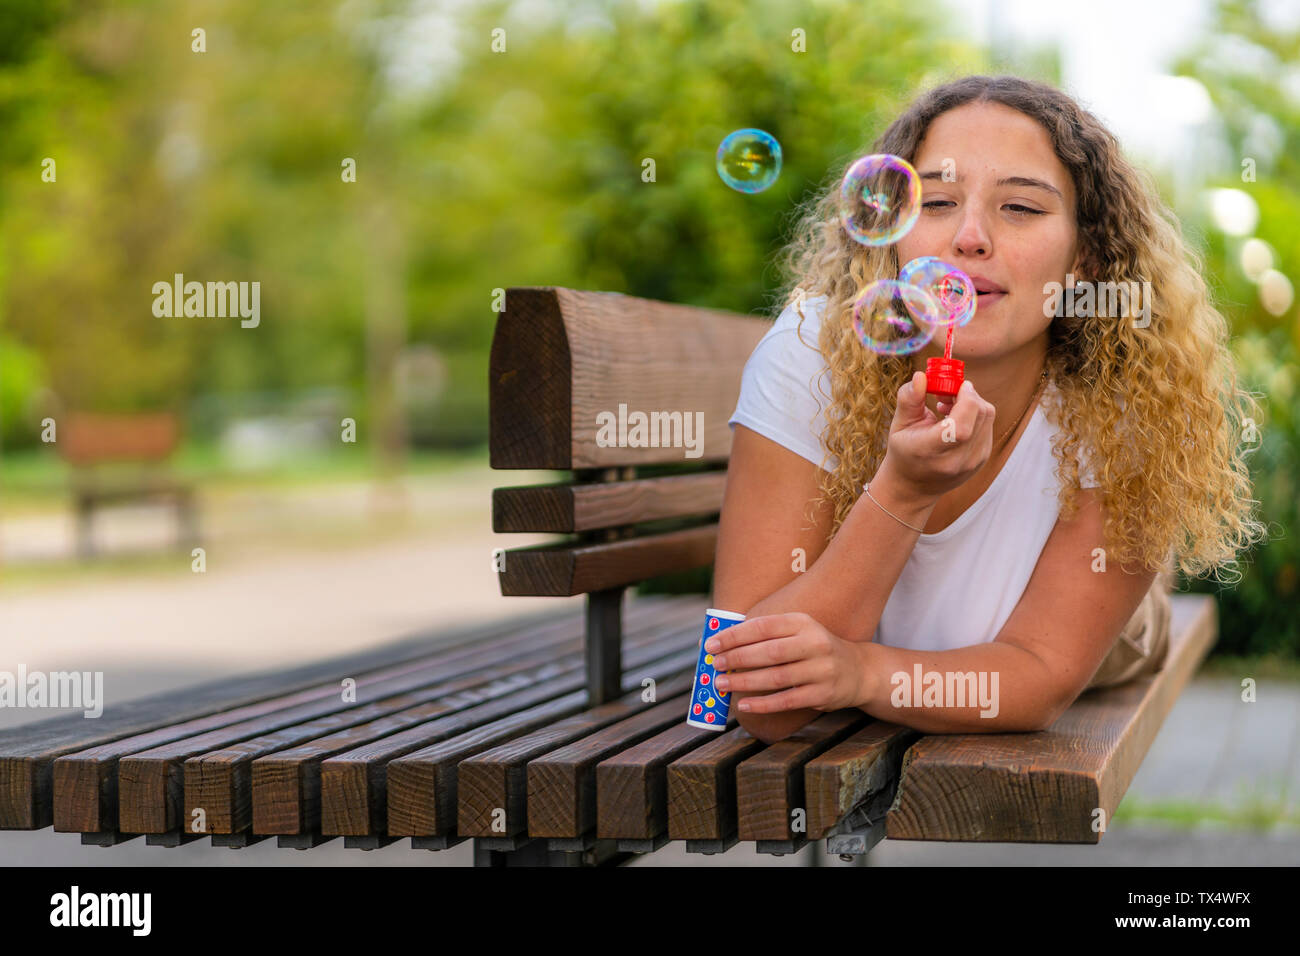 Young woman lying on bench, blowing soap bubbles Stock Photo